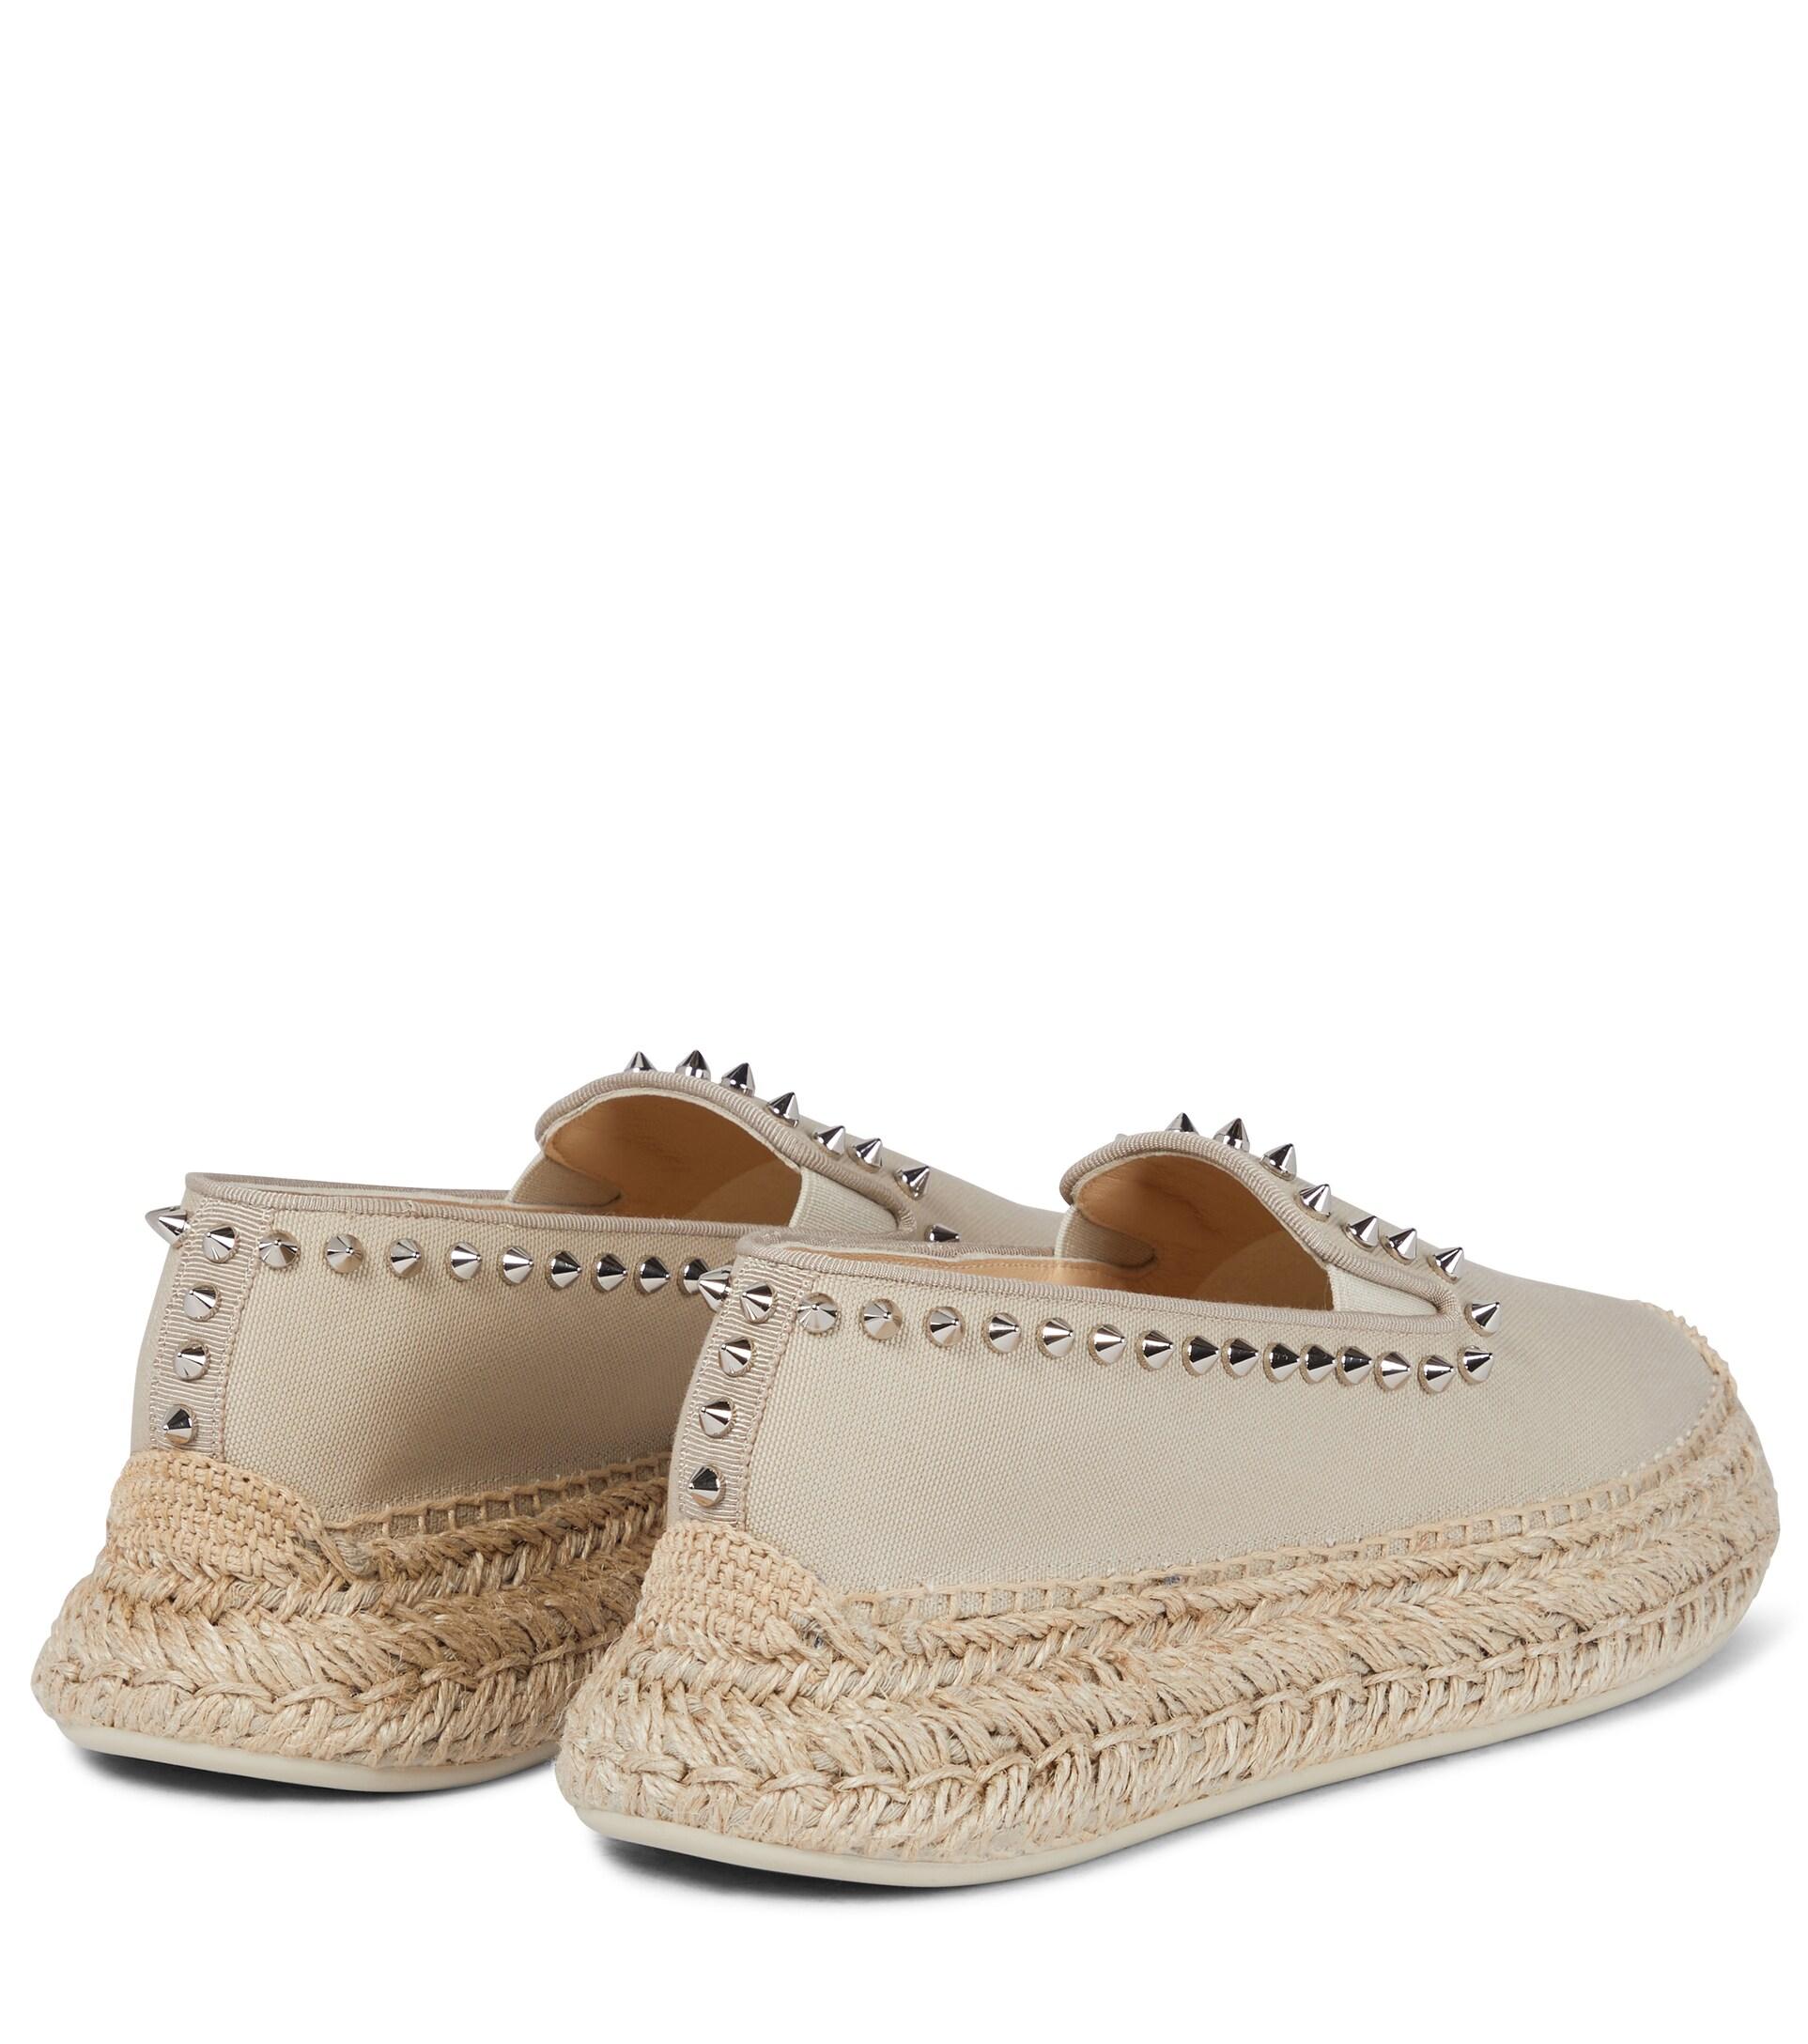 Christian Louboutin Espaboat Studded Canvas Espadrilles in Natural | Lyst